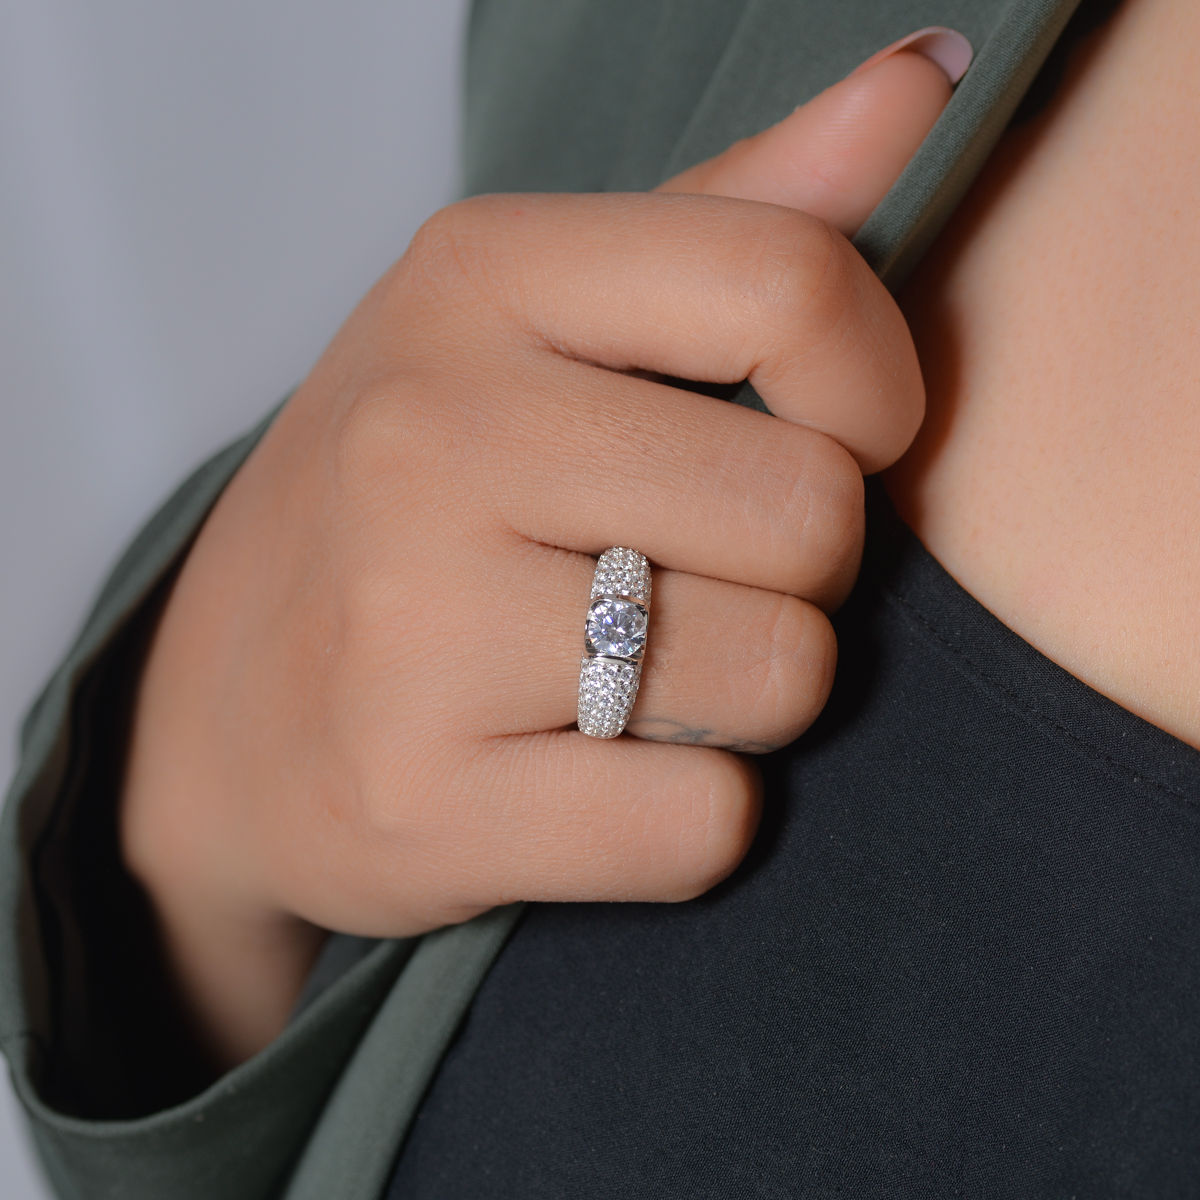 Buy Simple Silver Diamond Ring, Sterling Silver Hammered Band, Conflict  Free Solitaire Diamond Ring, Dainty Silver Diamond Ring Online in India -  Etsy